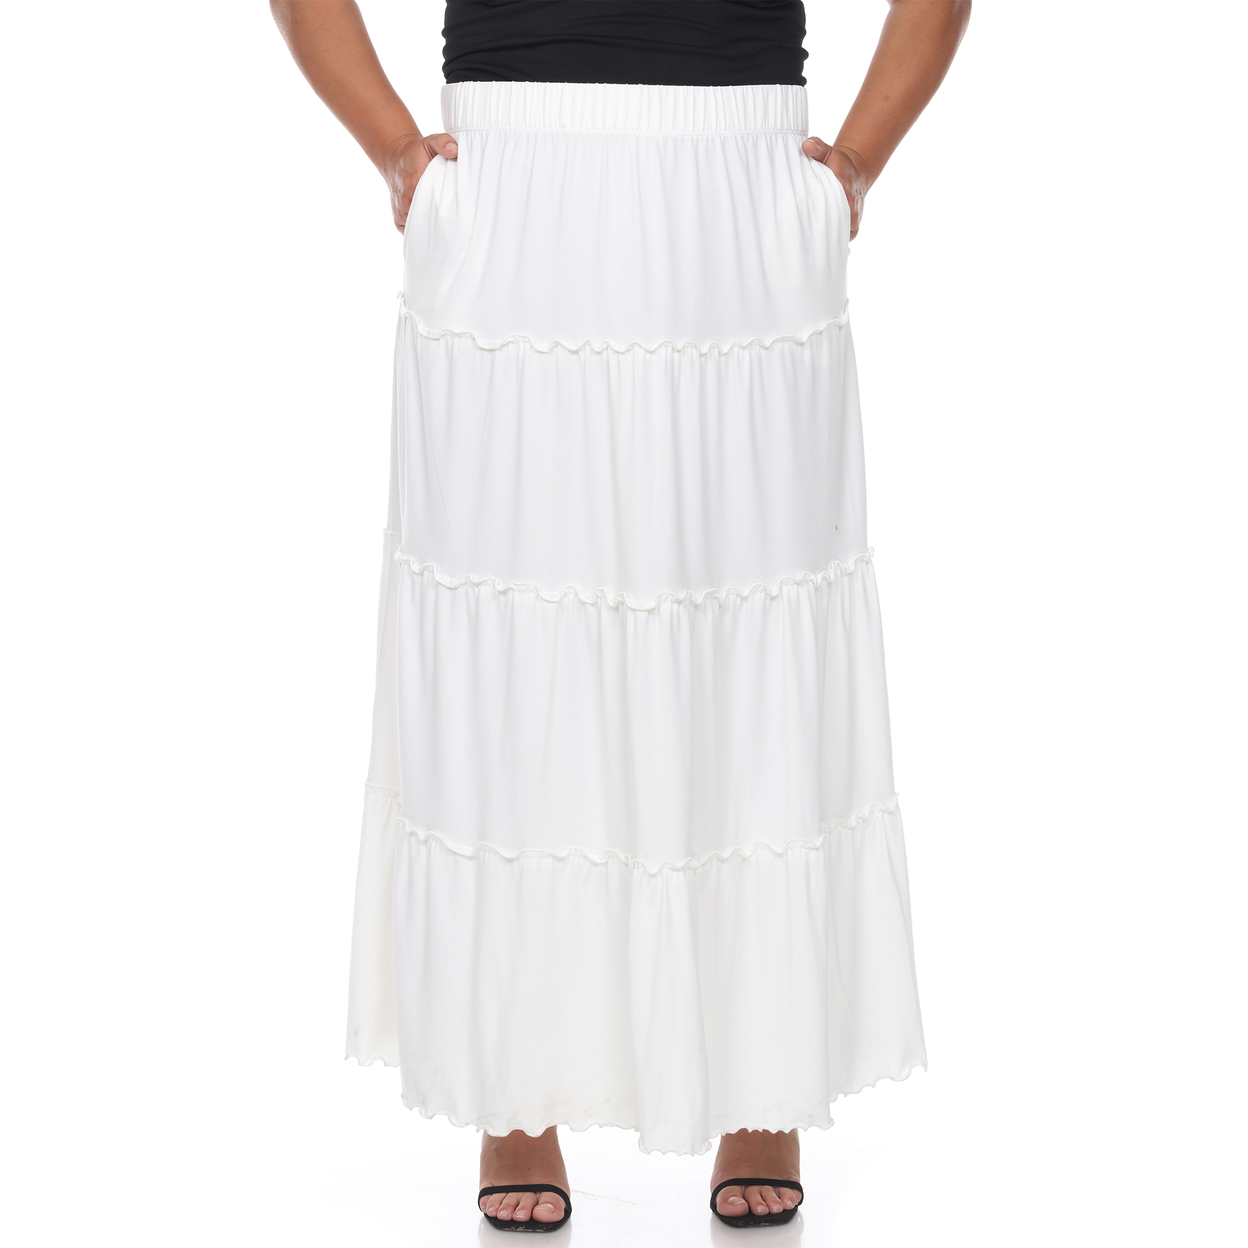 White Mark Women's Plus Size Tiered Maxi Skirt With Pockets - Navy, 2x